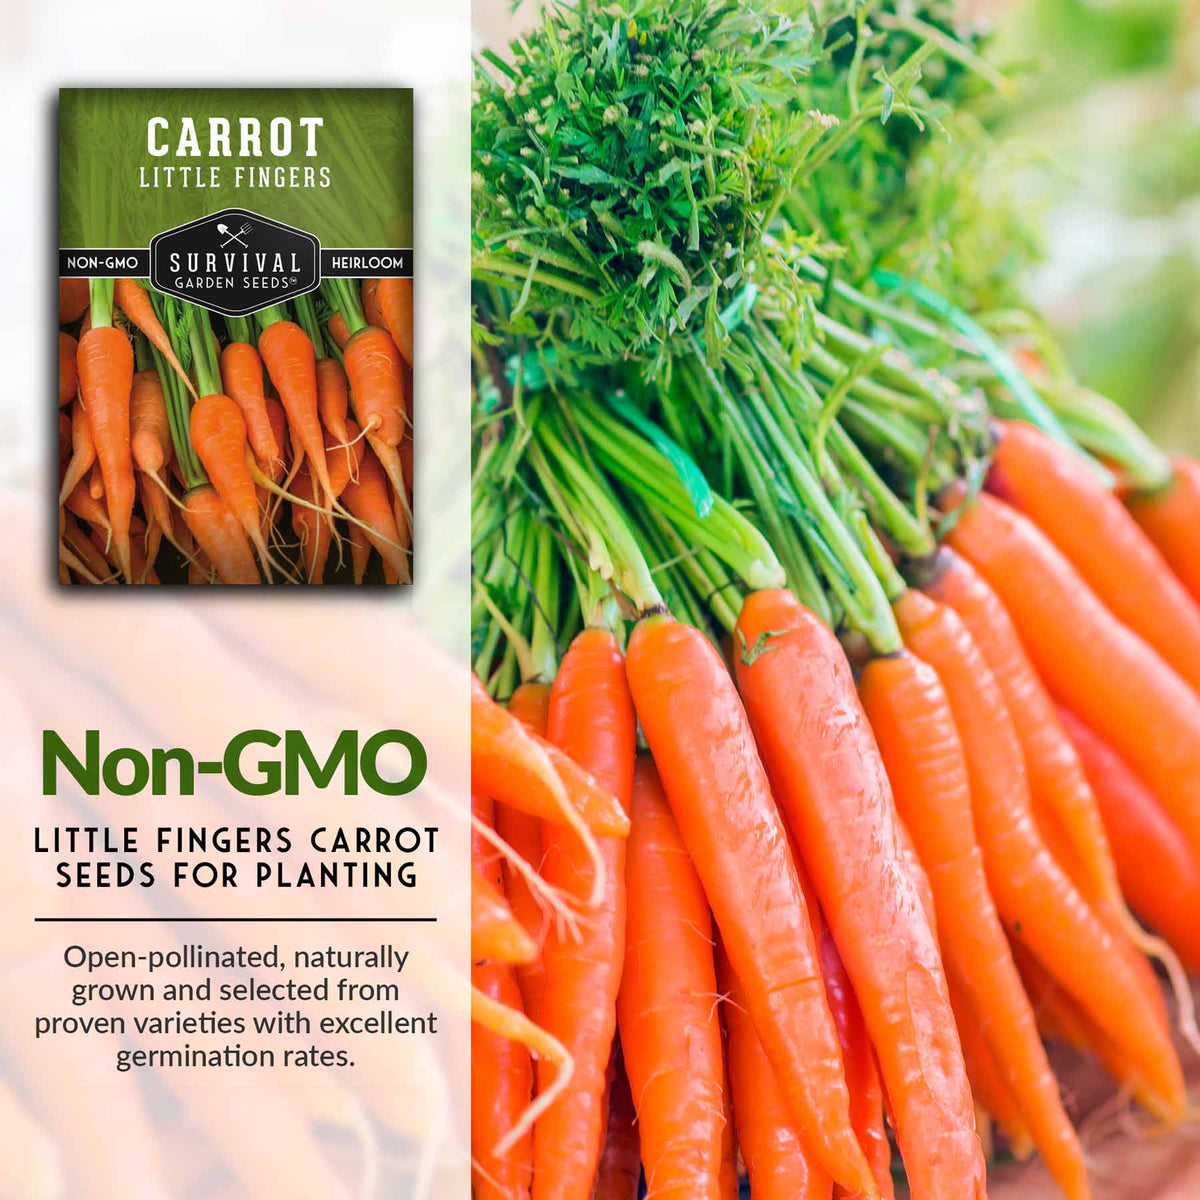 Non-GMO little fingers carrot seeds for planting